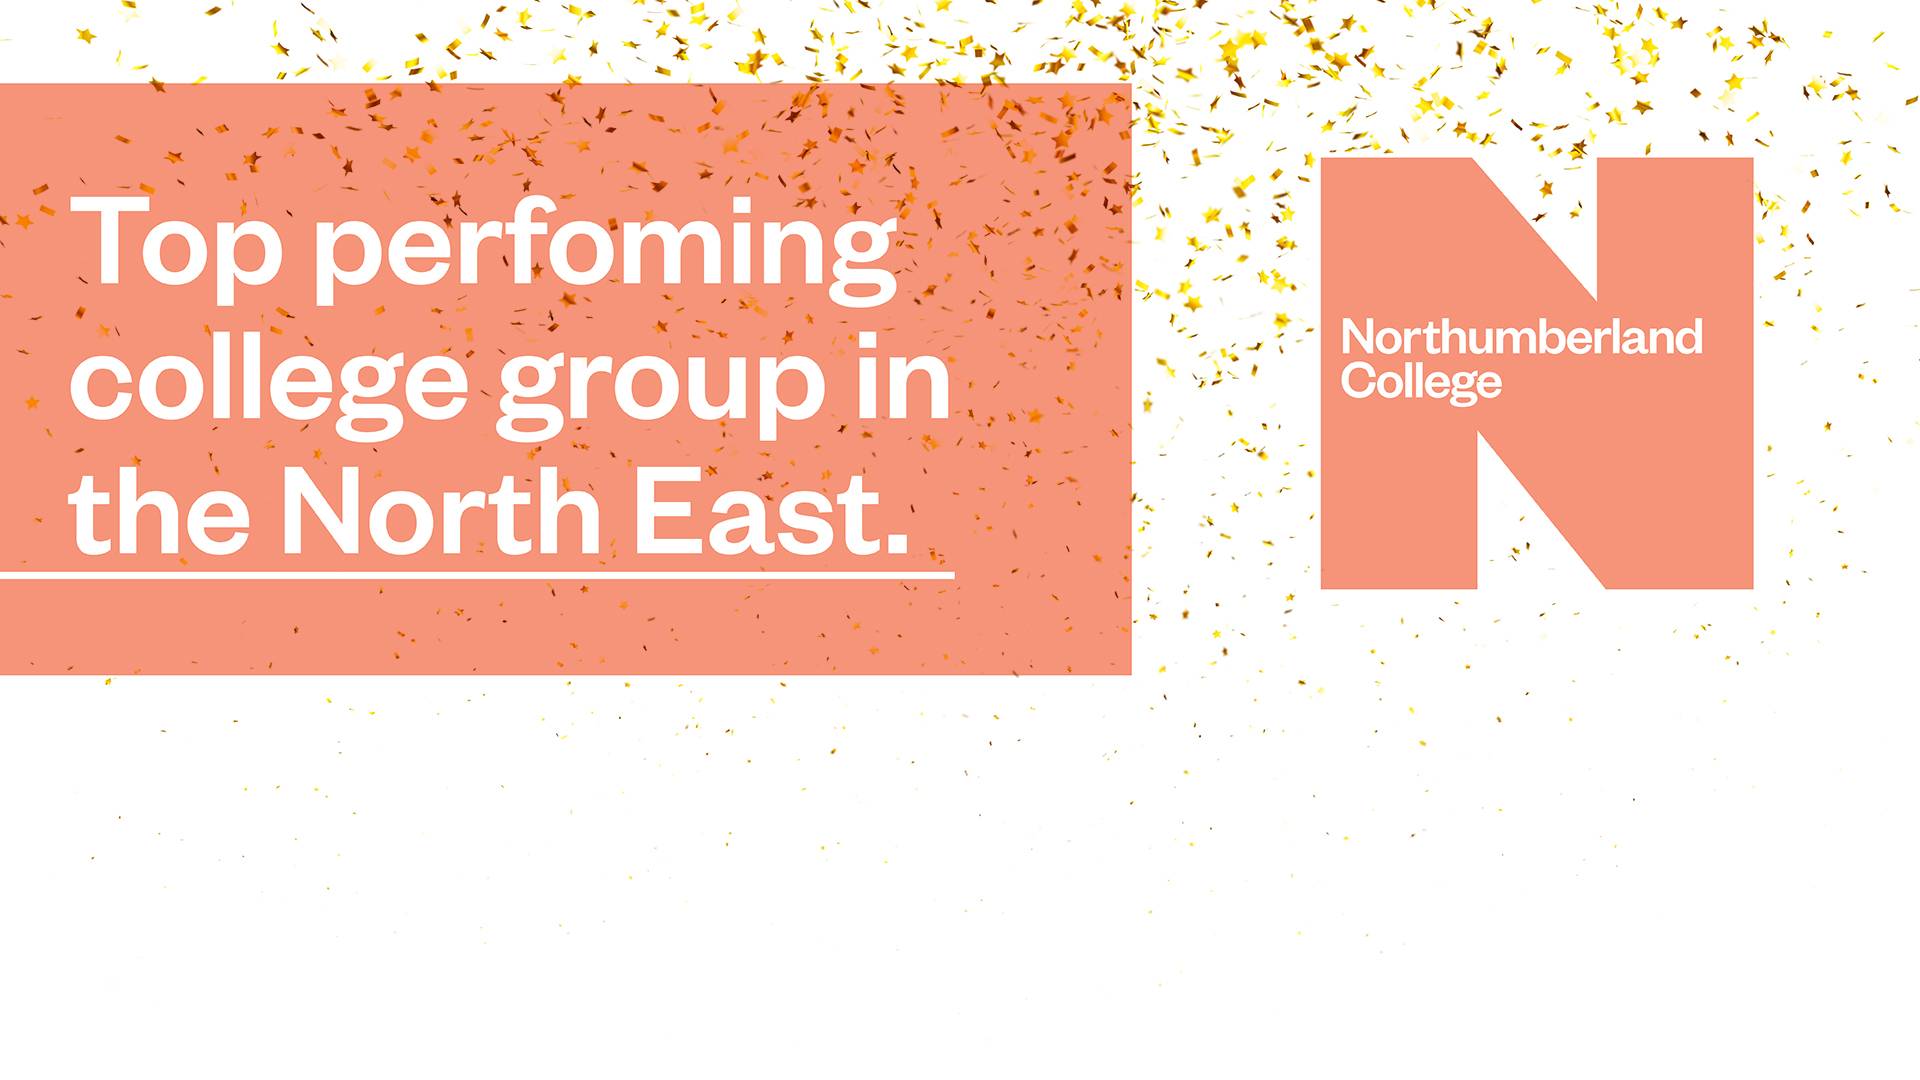 Top performing college in the North East